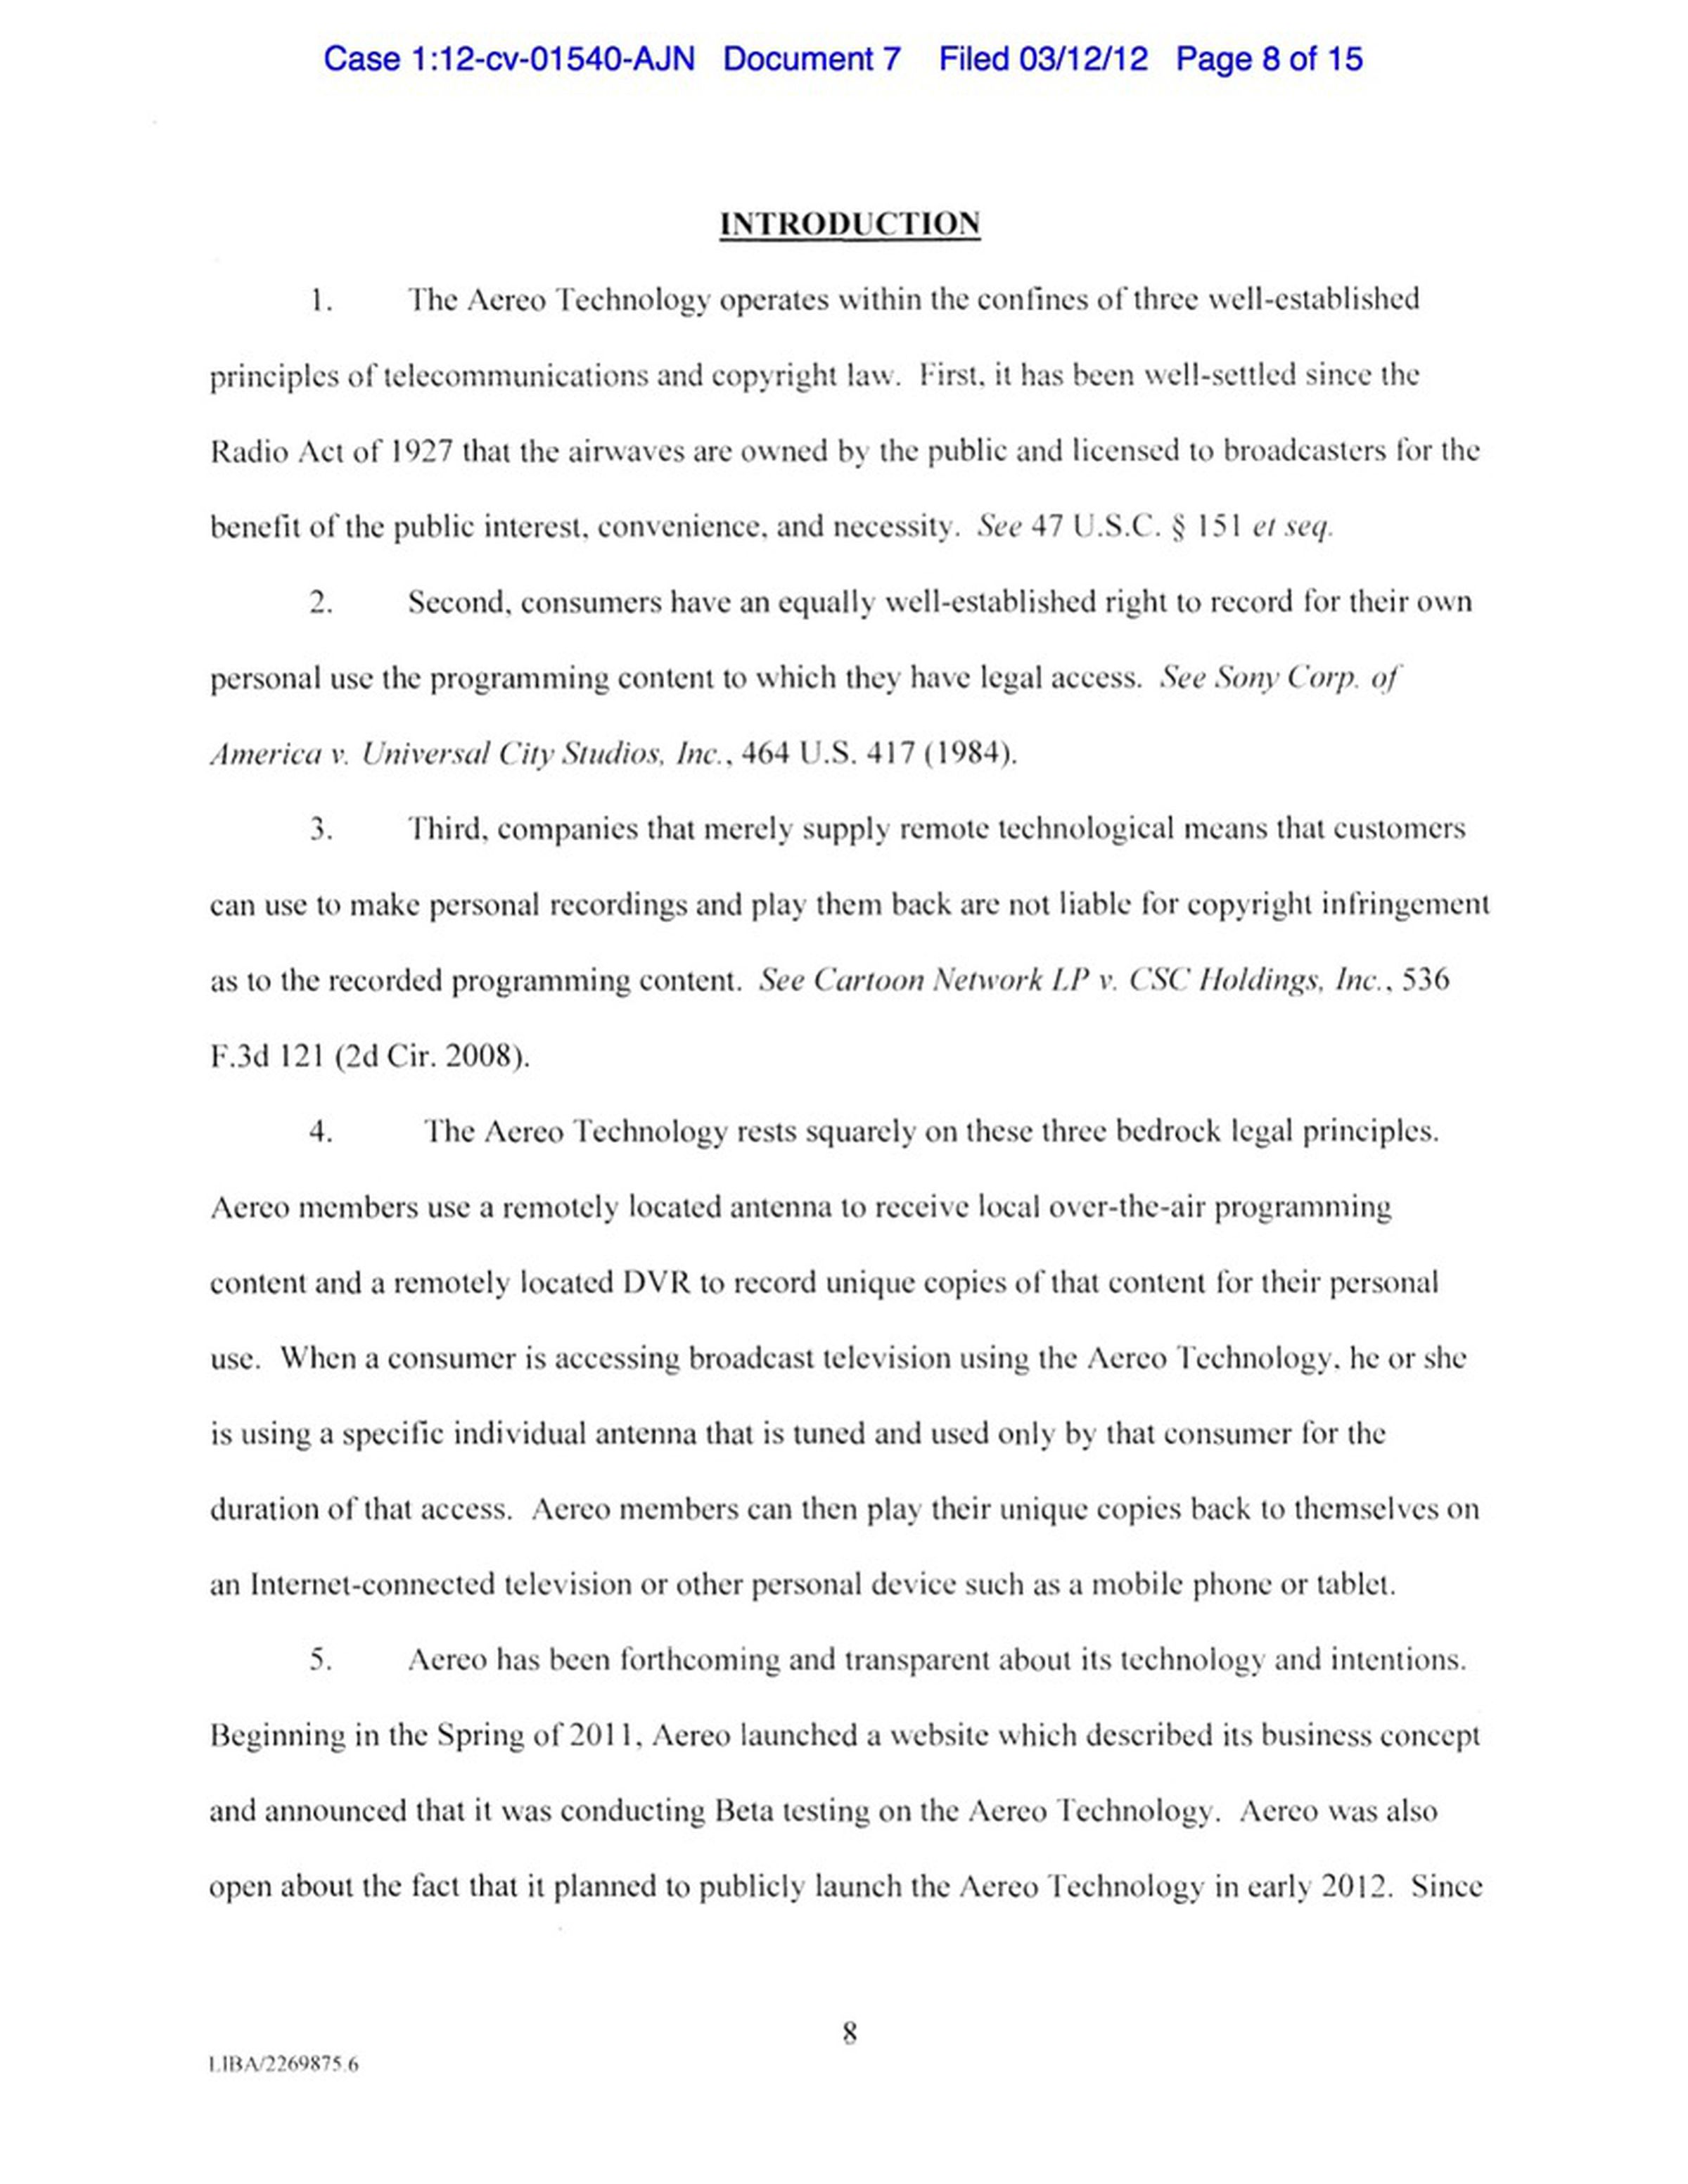 Aereo's countersuit against Disney, NBC, CBS, and others